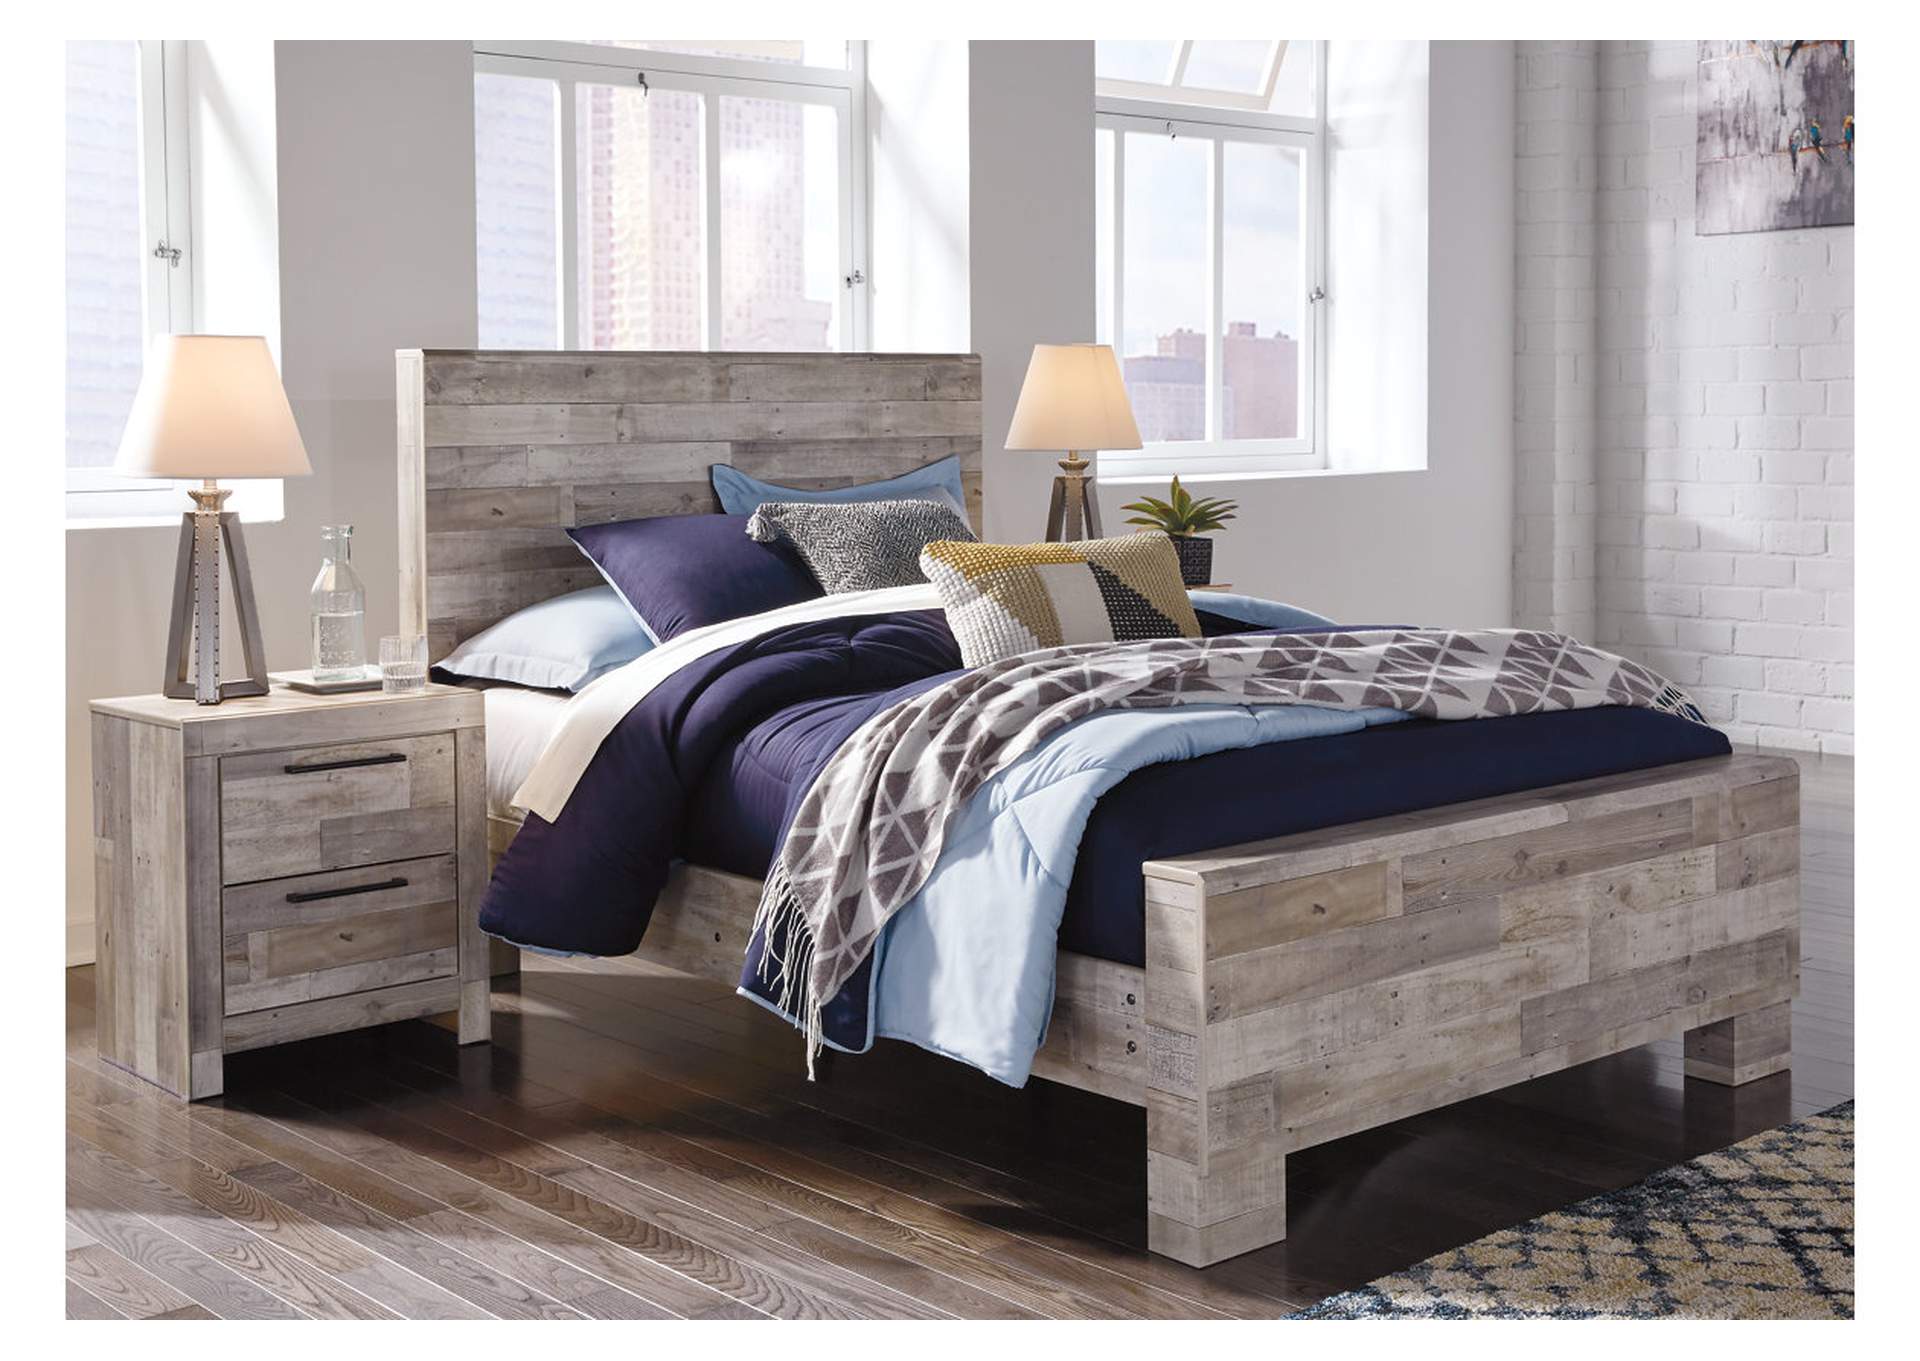 Effie Full Panel Bed,Signature Design By Ashley